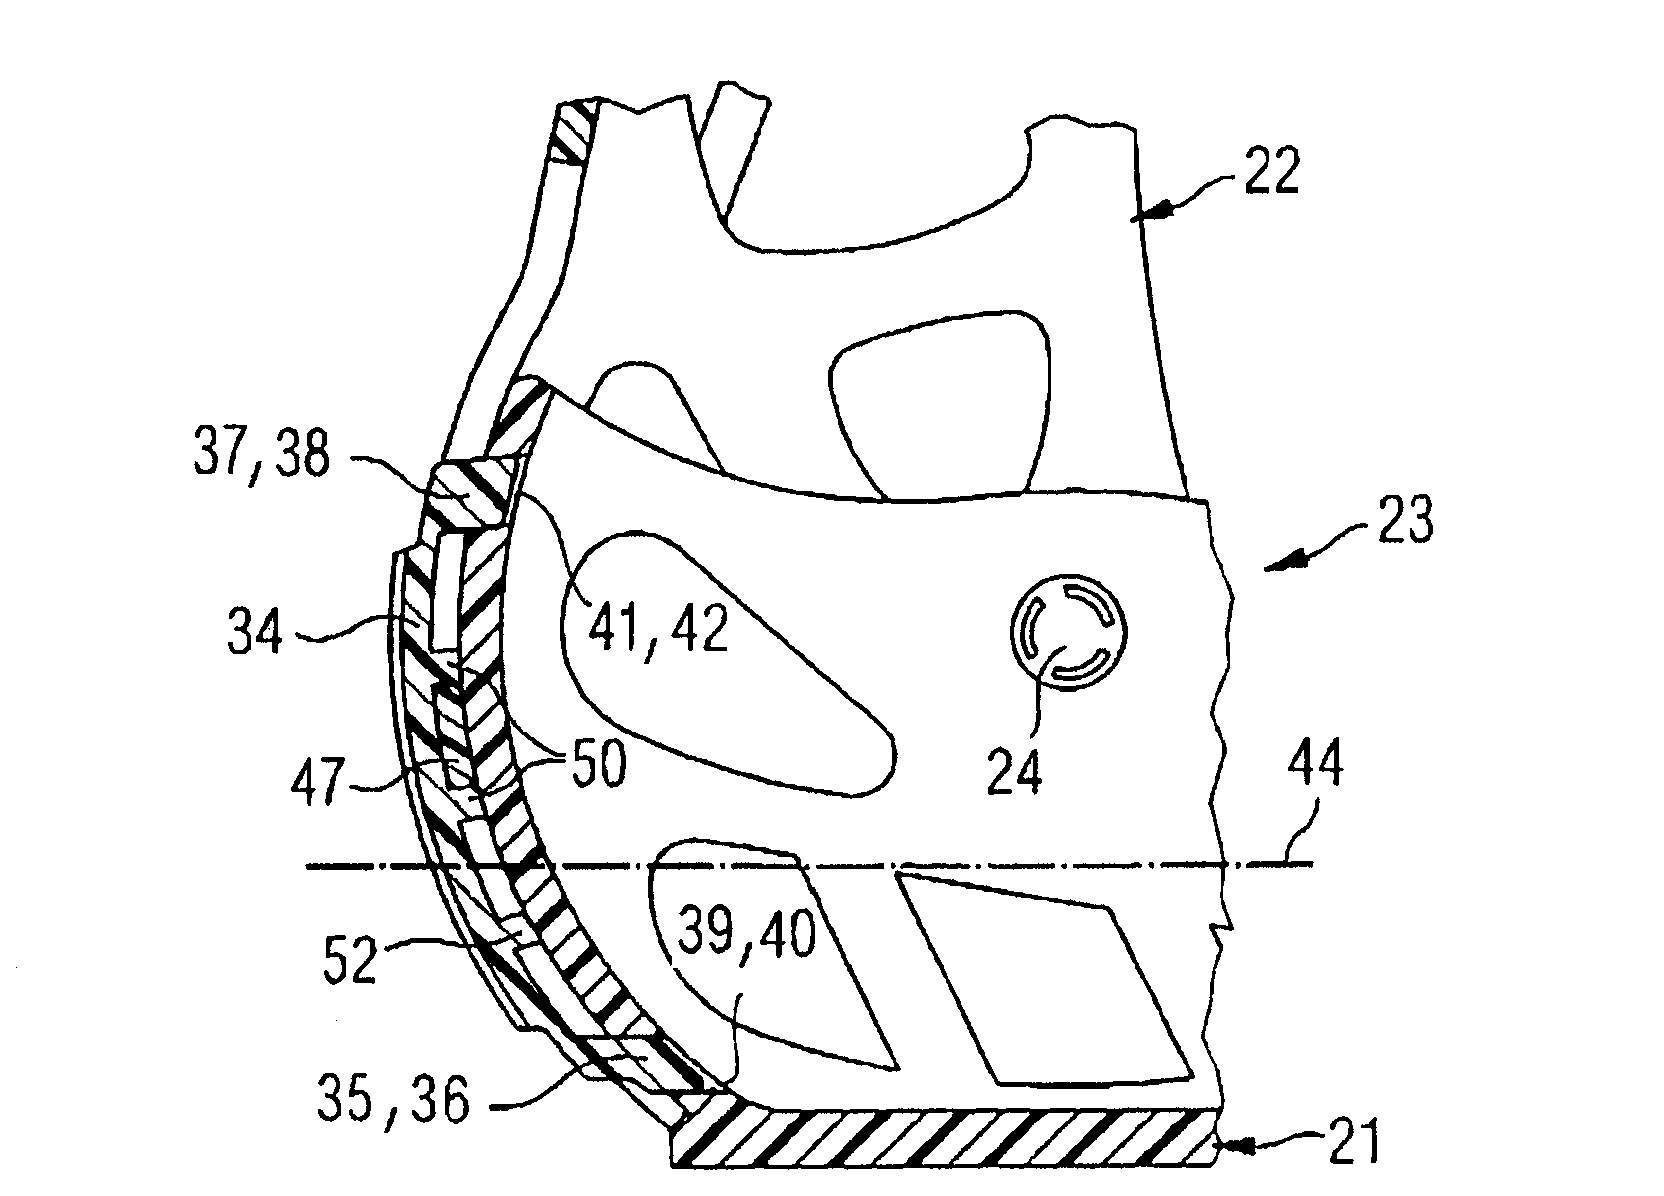 Casing structure for fixing and containing shank